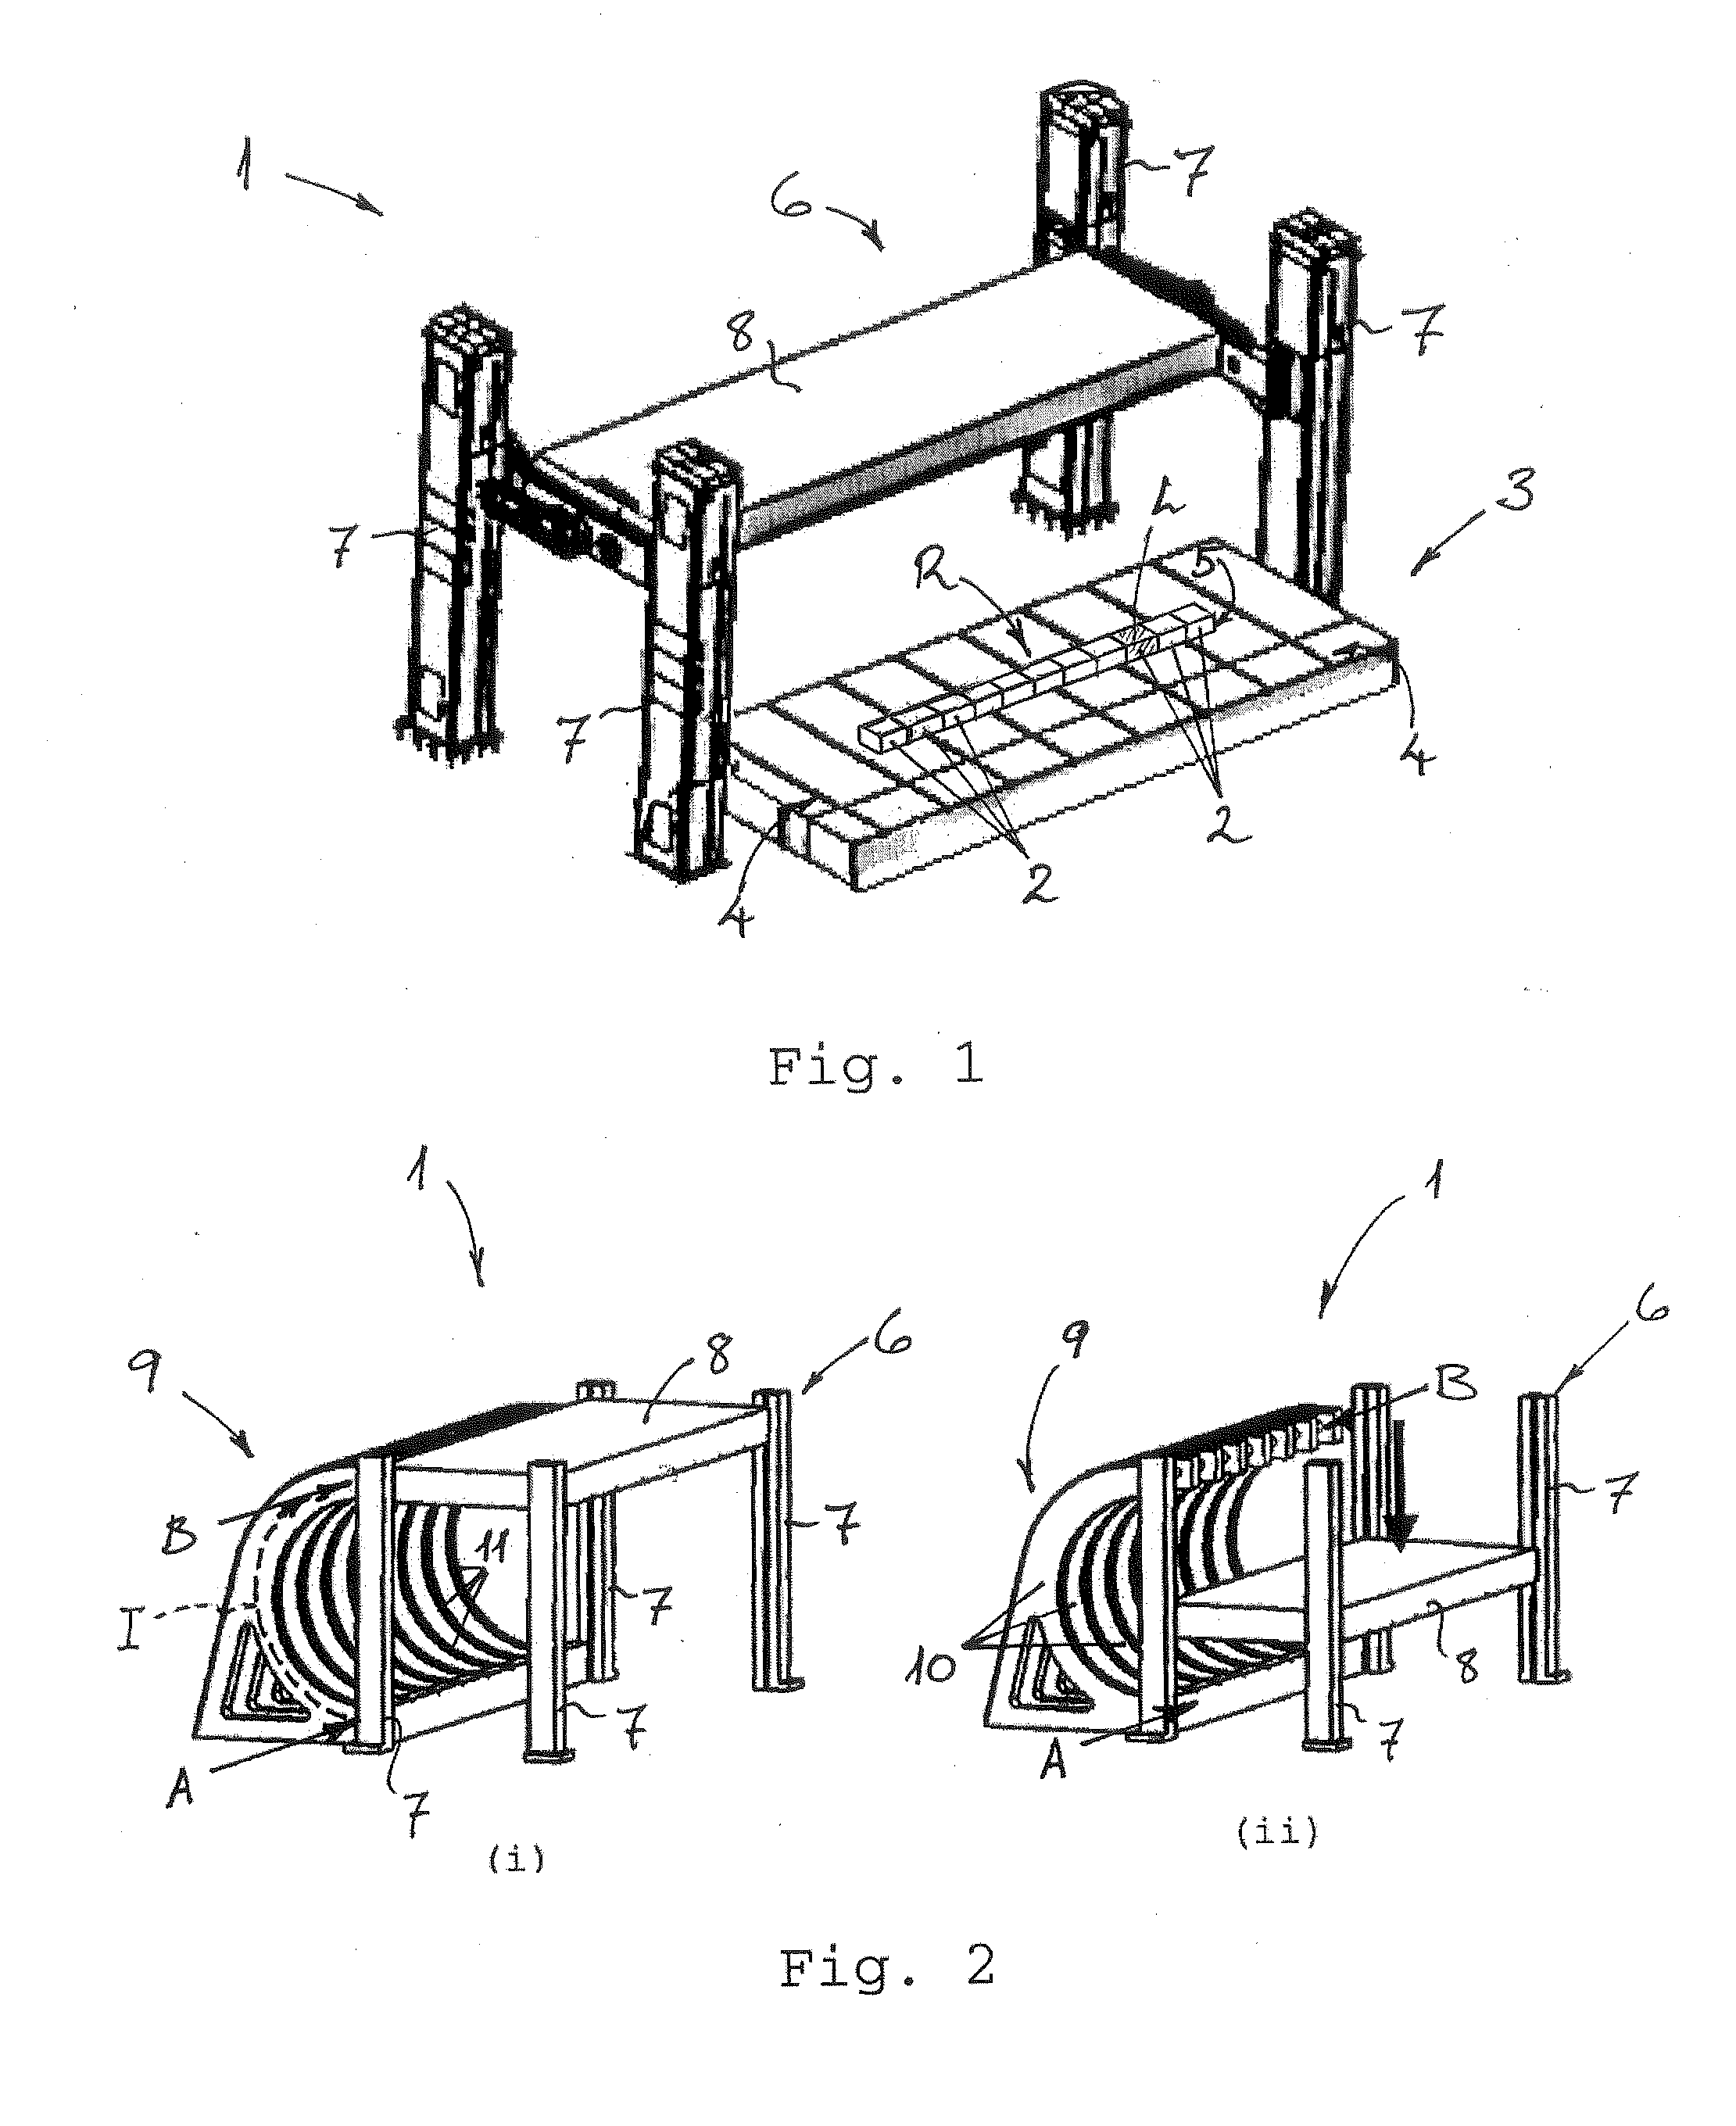 System and method of manufacturing composite modules